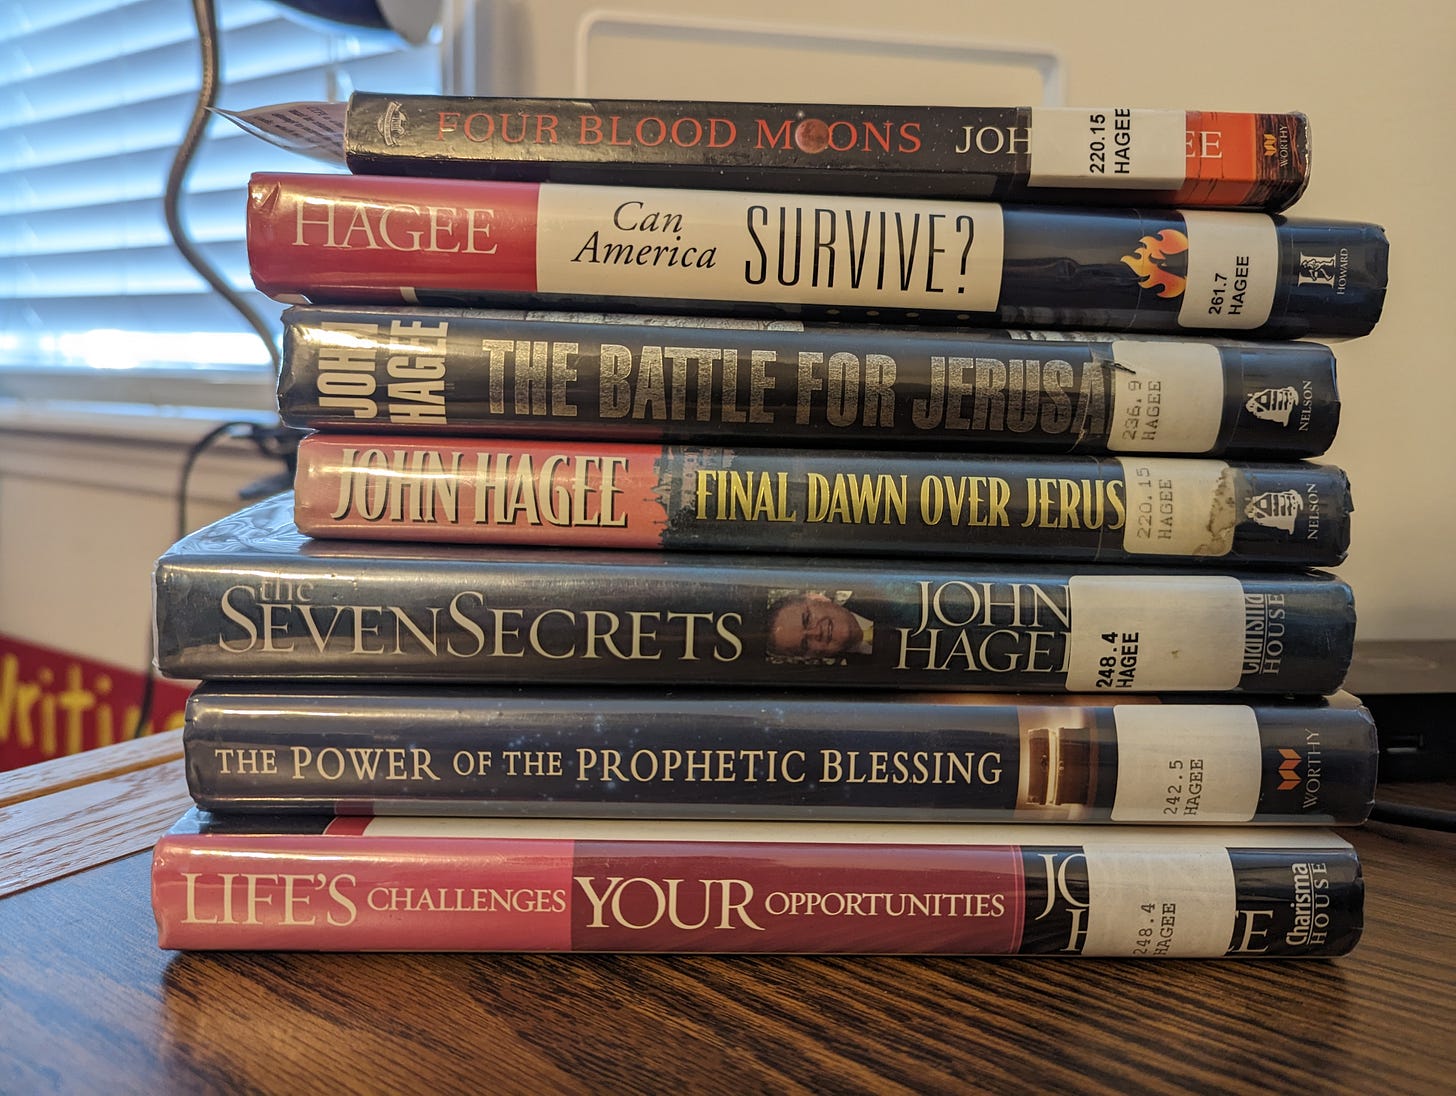 A stack of Hagee's books on a desk: Four Blood Moons, Can America Survive, The Battle for Jerusalem, Final Dawn Over Jerusalem, The Seven Secrets, The Power of the Prophetic Blessing, and Life's Challenges Your Opportunities.